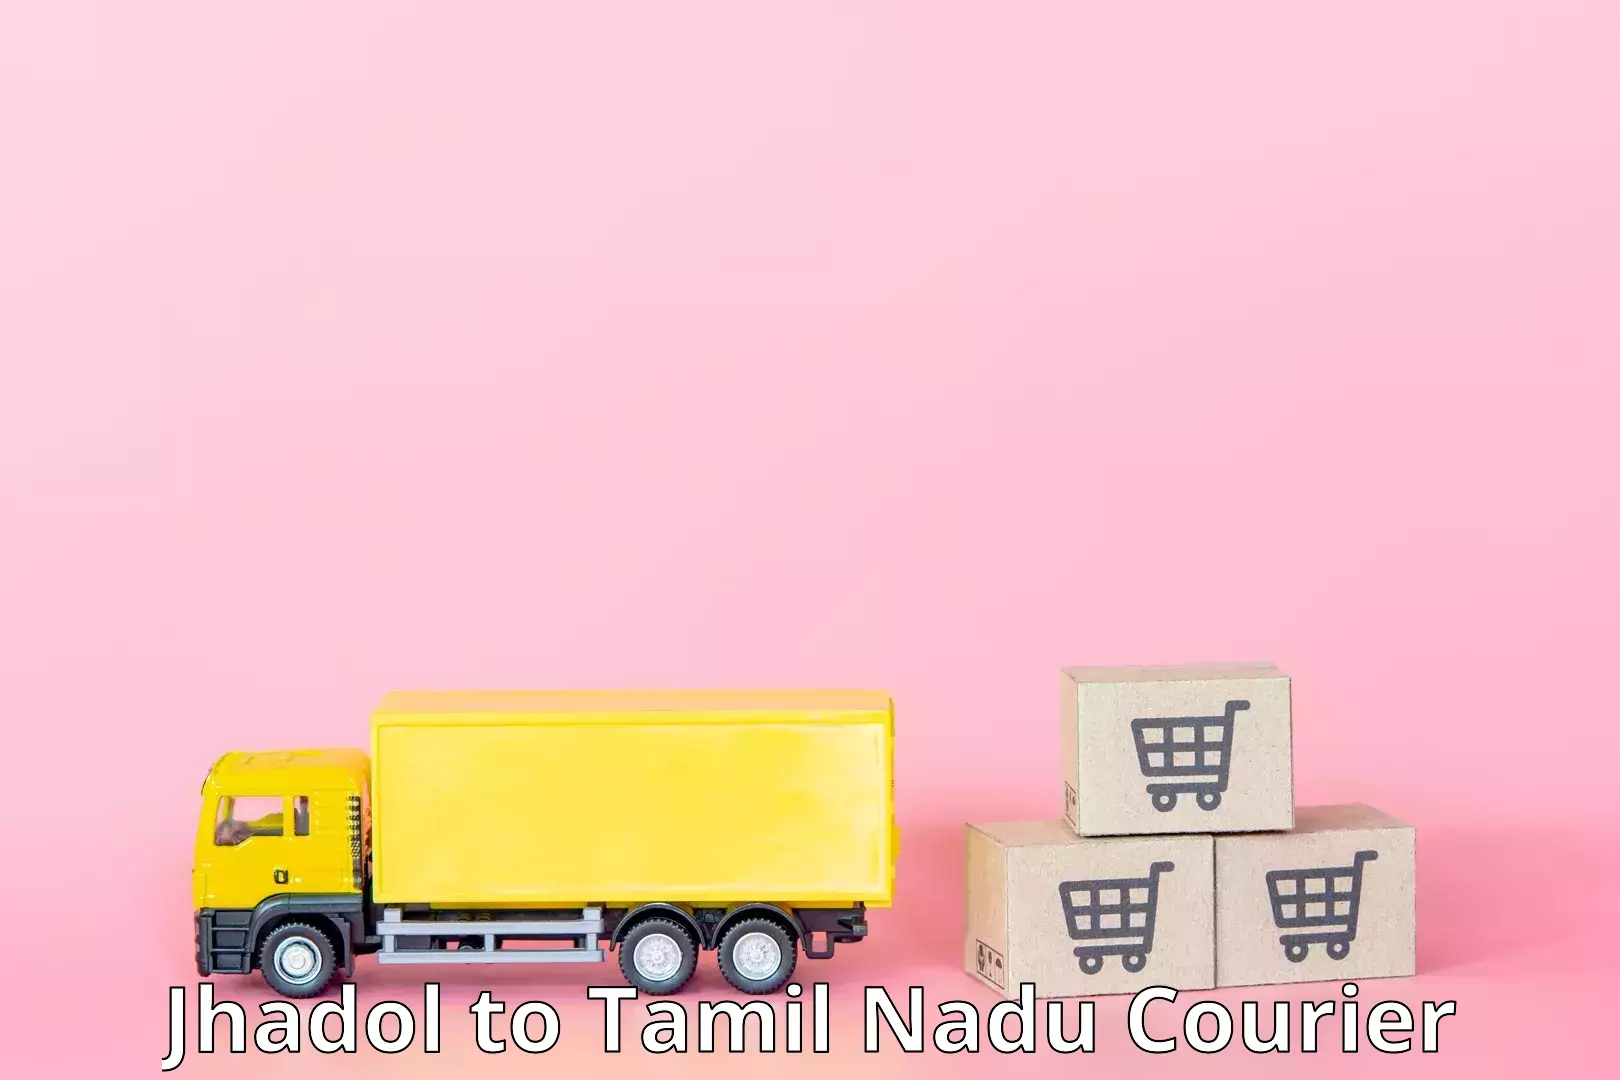 Parcel service for businesses Jhadol to Ooty